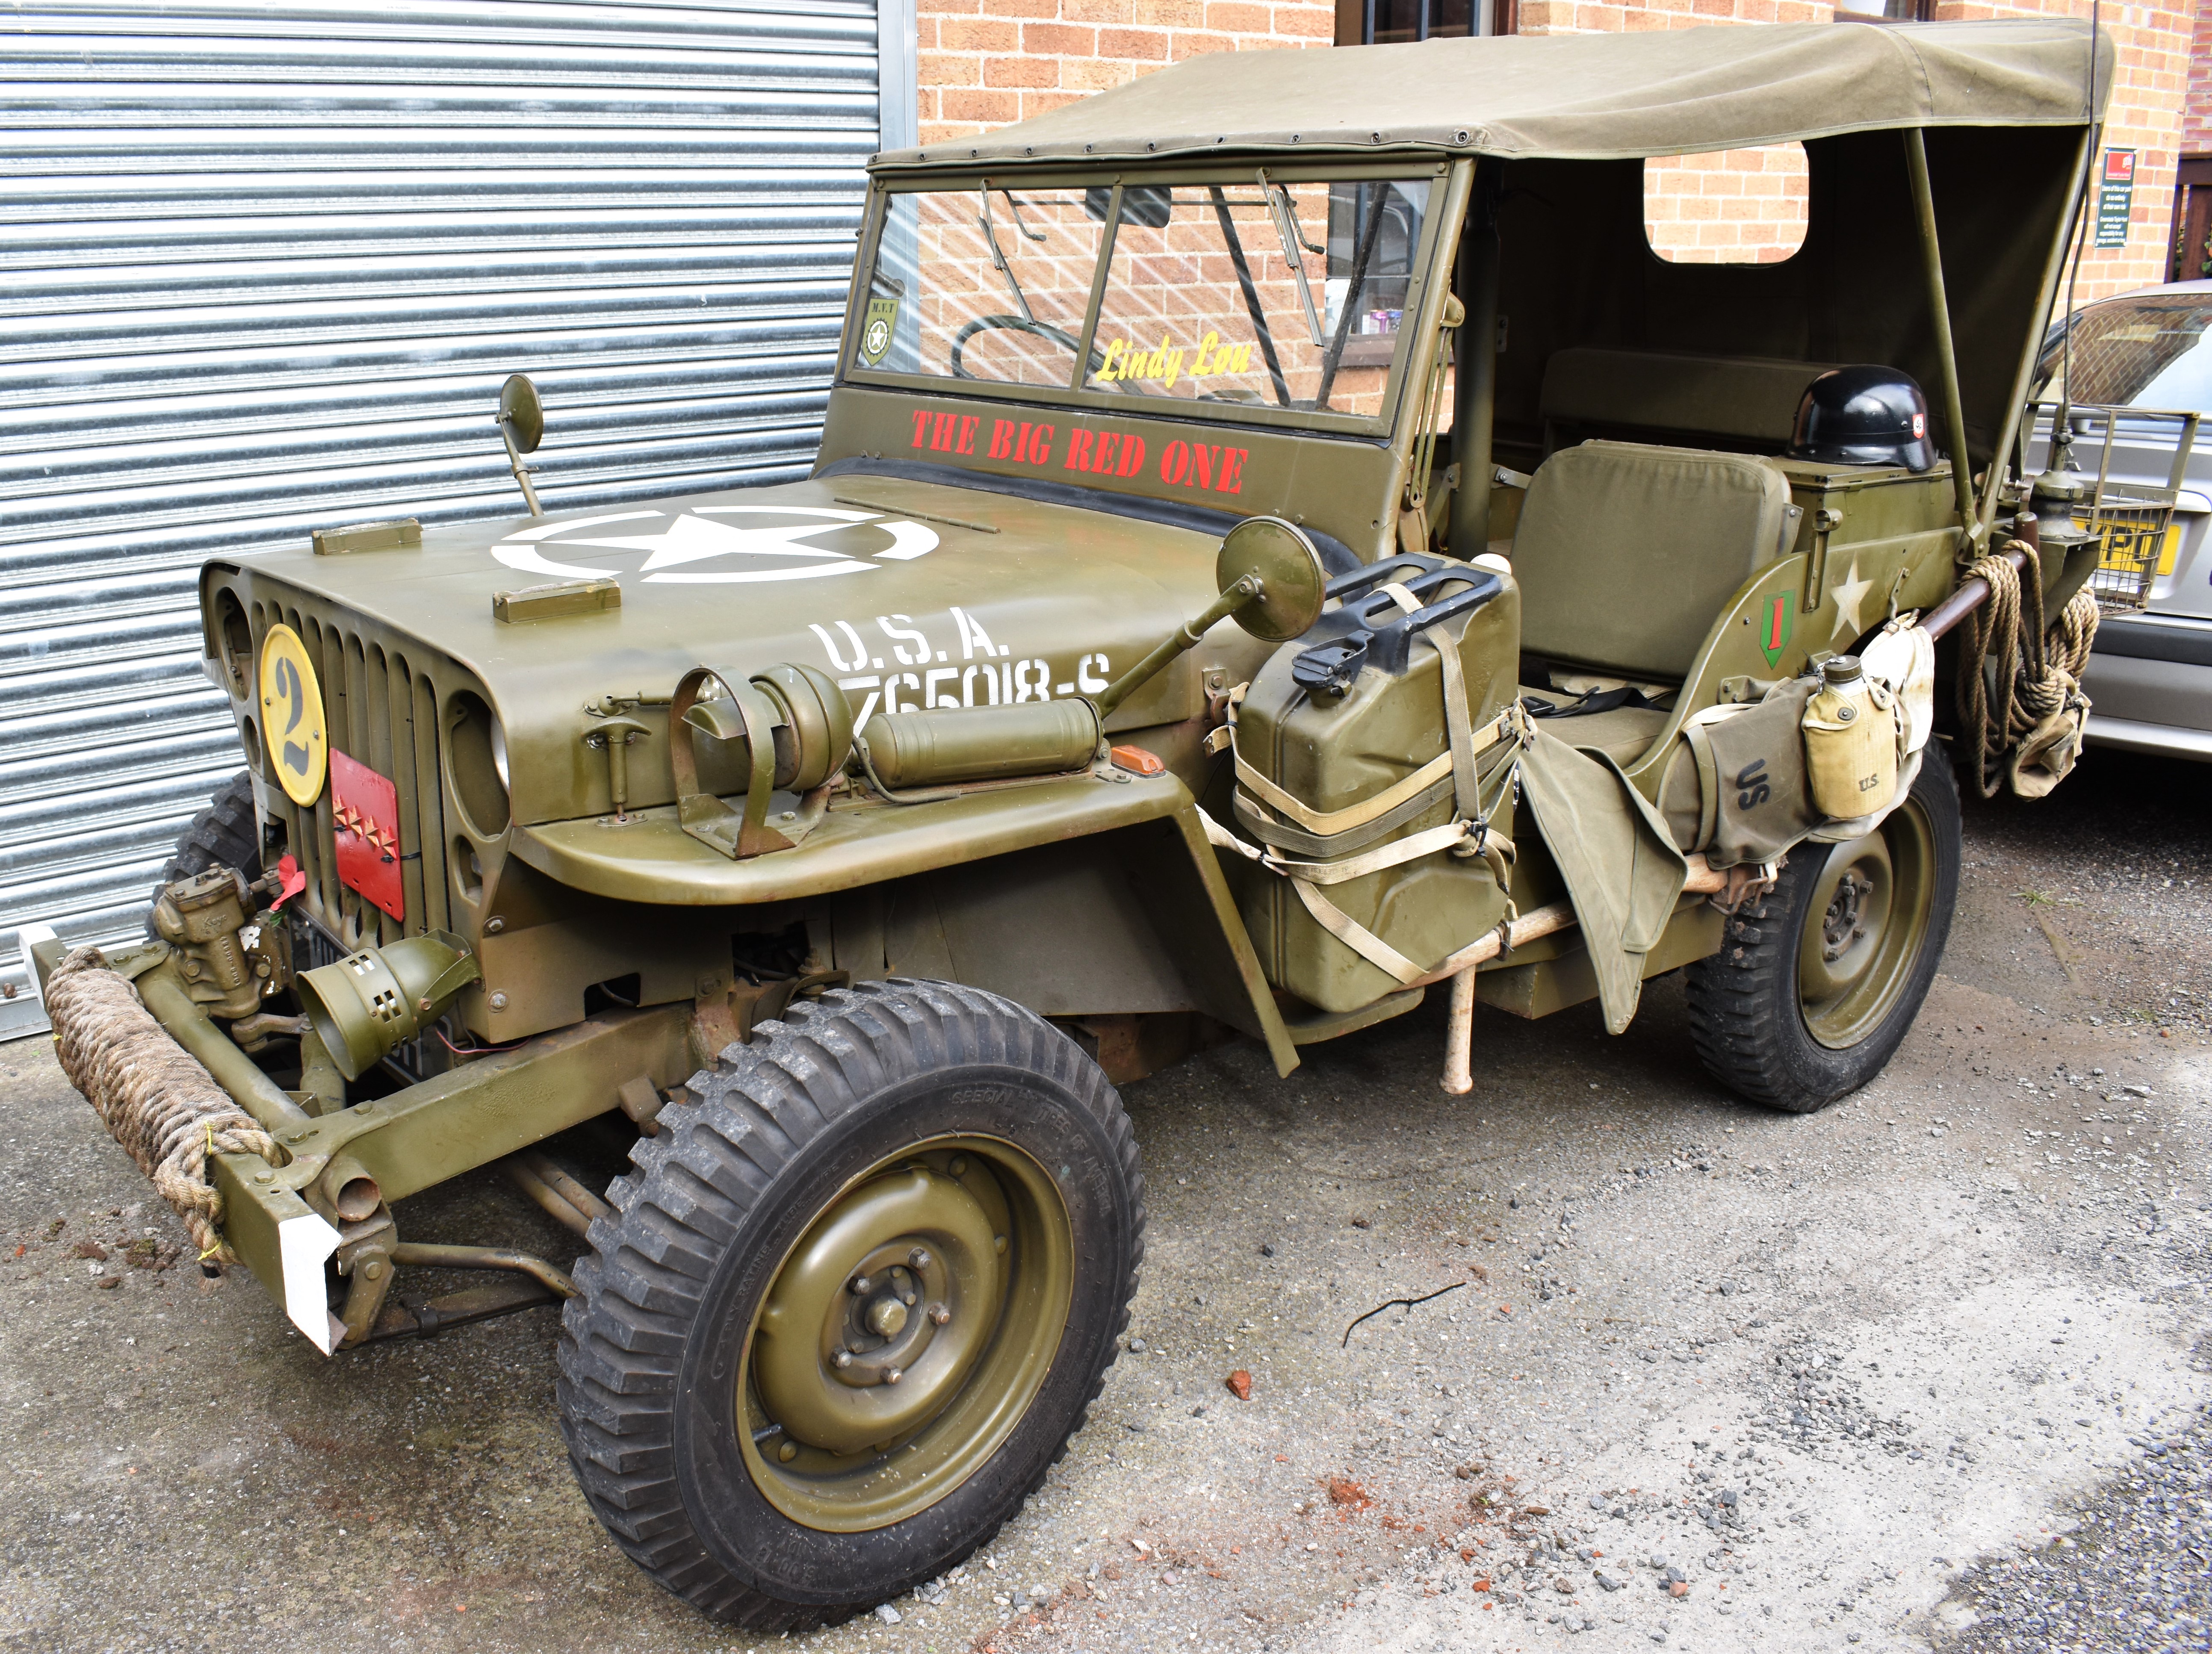 WILLY'S JEEP MB - VEHICLE REGISTRATION NUMBER M113 RCH A Unique Hybrid Replica of a Second World War - Image 3 of 9